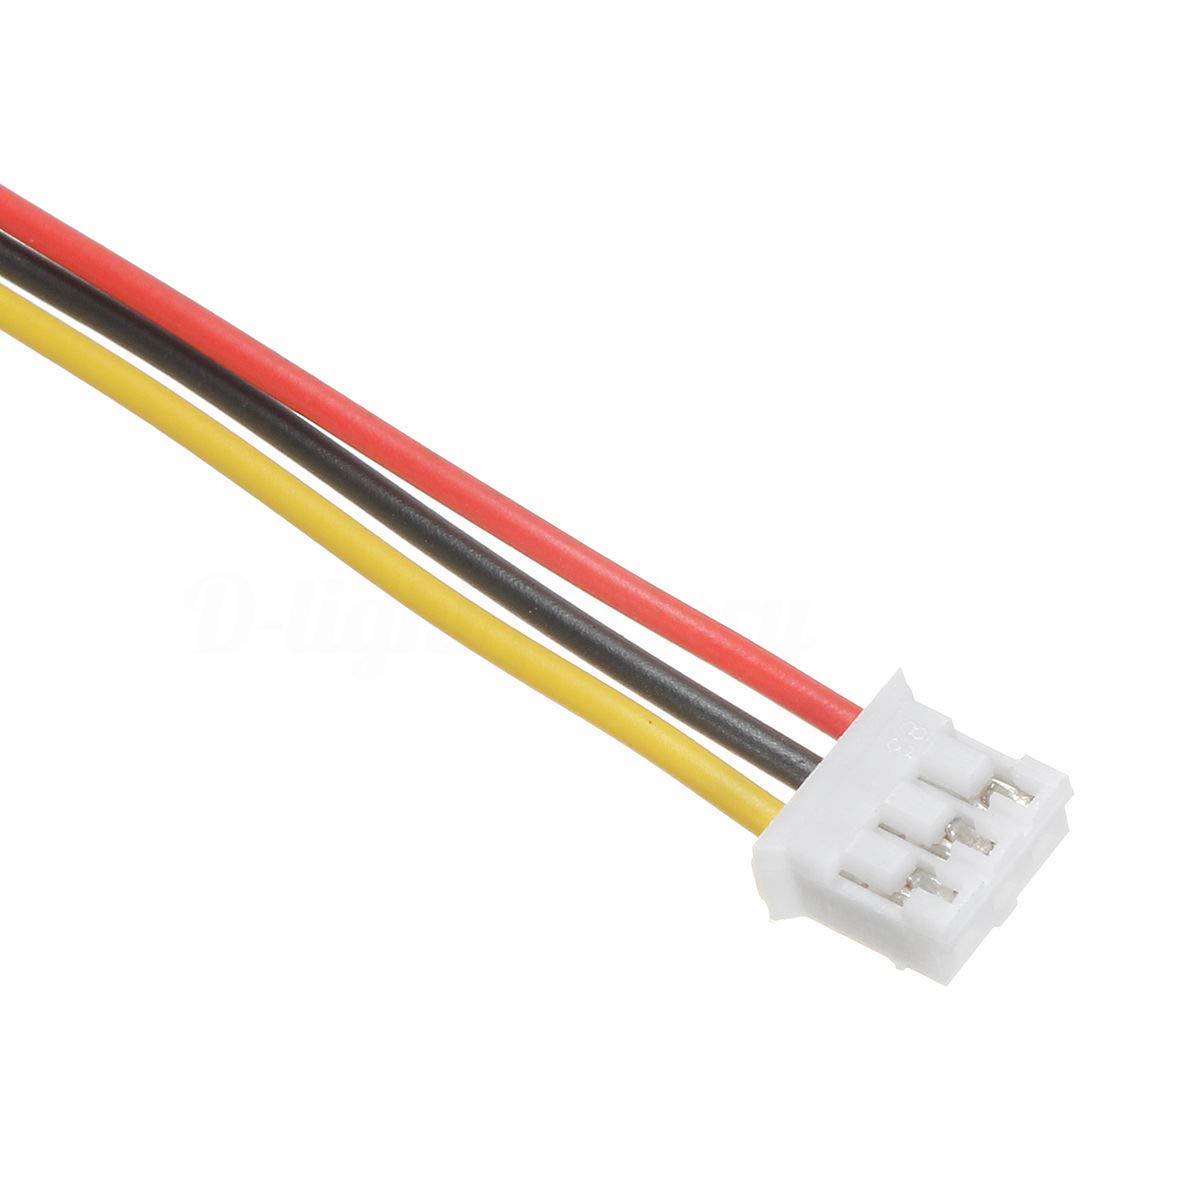 10 x Mini Micro JST 2.0 PH 3 Pin Male/Male with 150 mm Cable and Female